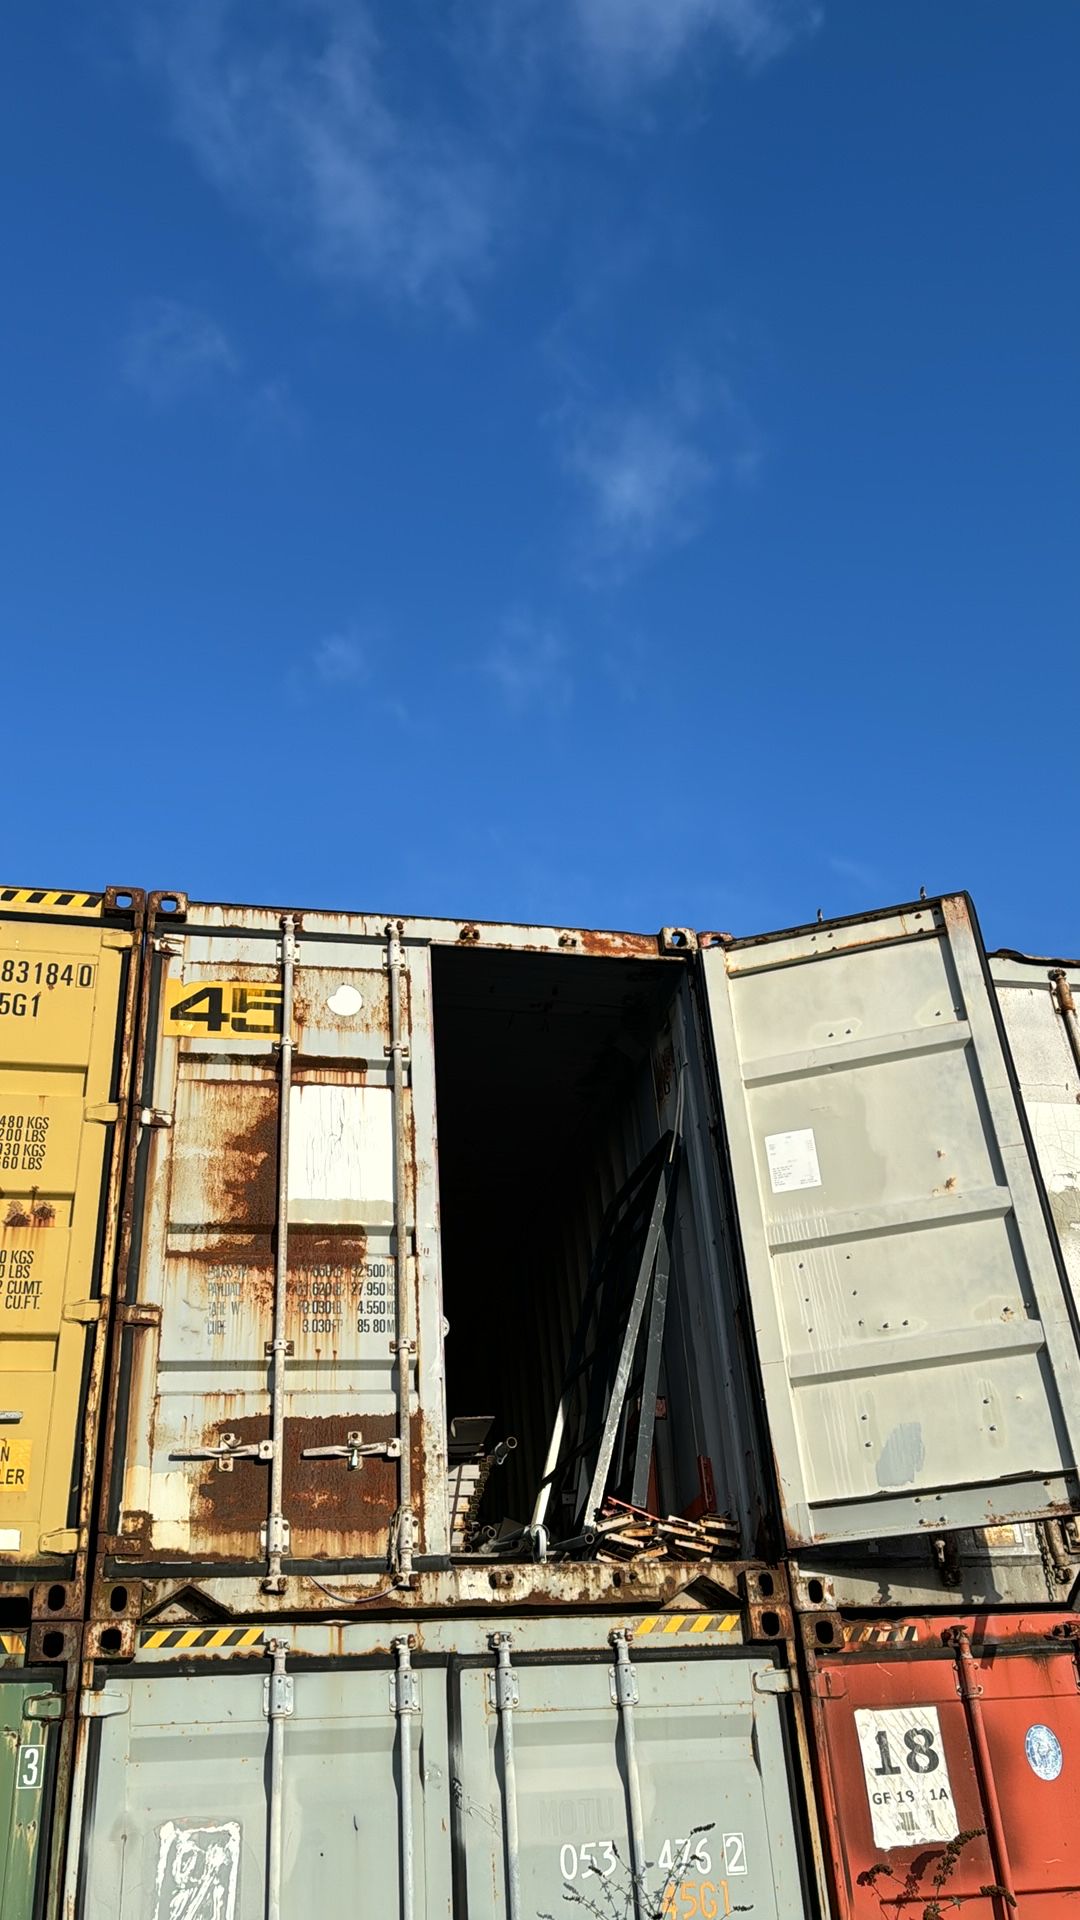 Shipping container, 46 (no ref, above container 45)